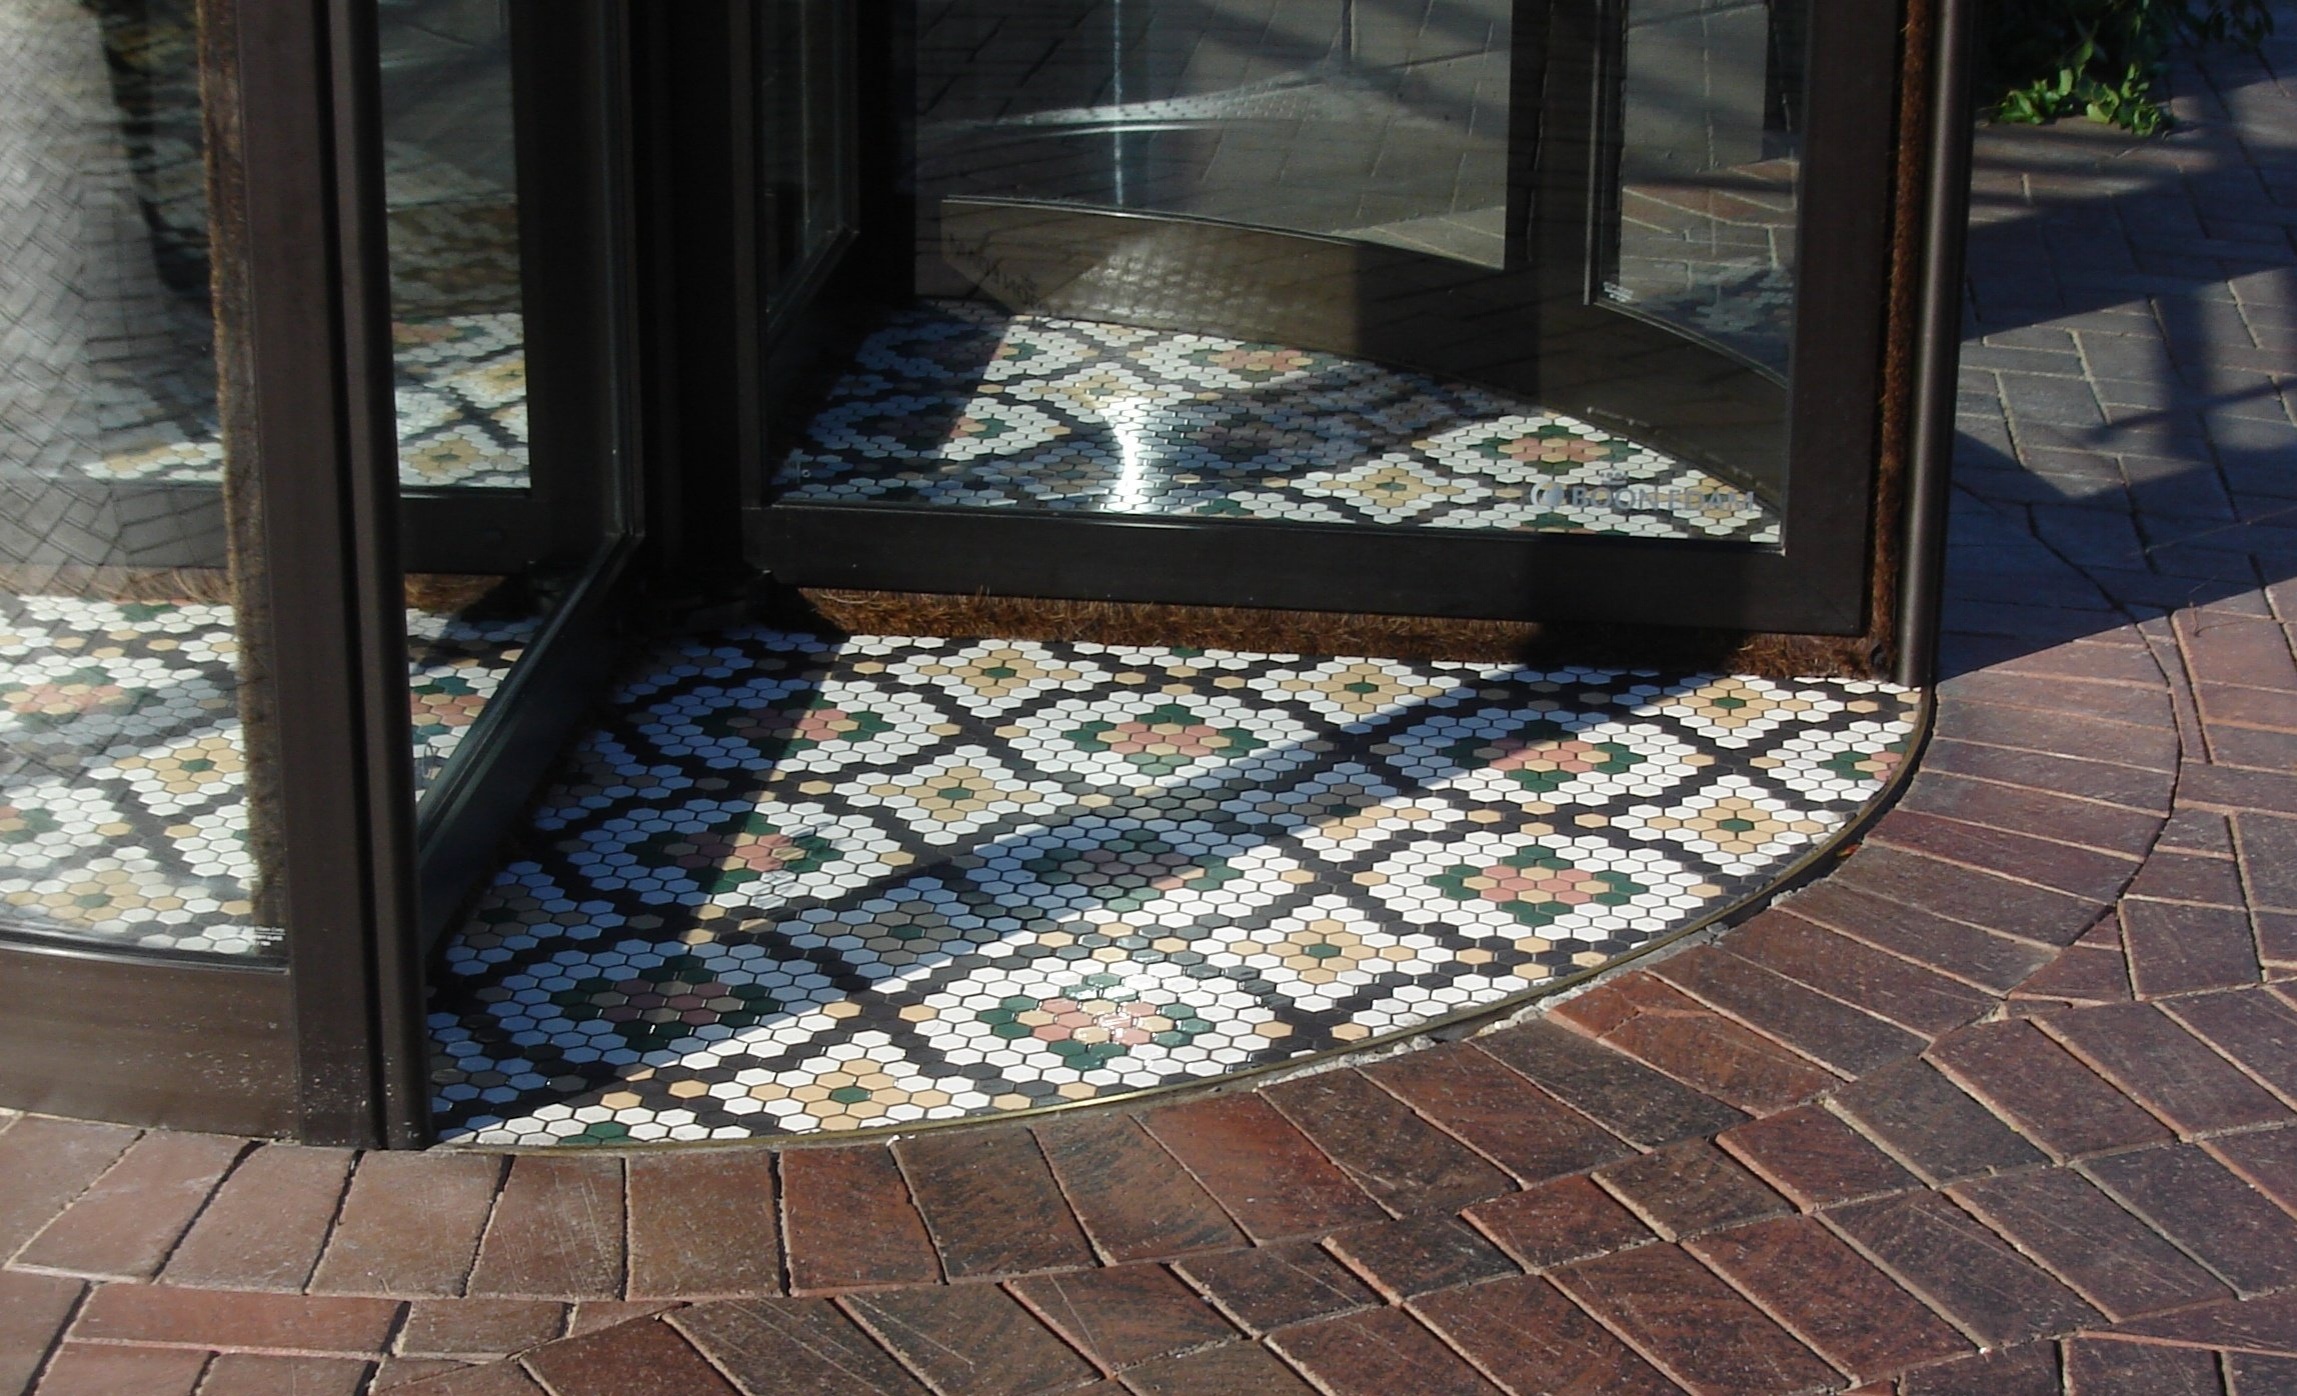 During revolving door installation, use a floor frame or matwell ring for a smooth transition strip